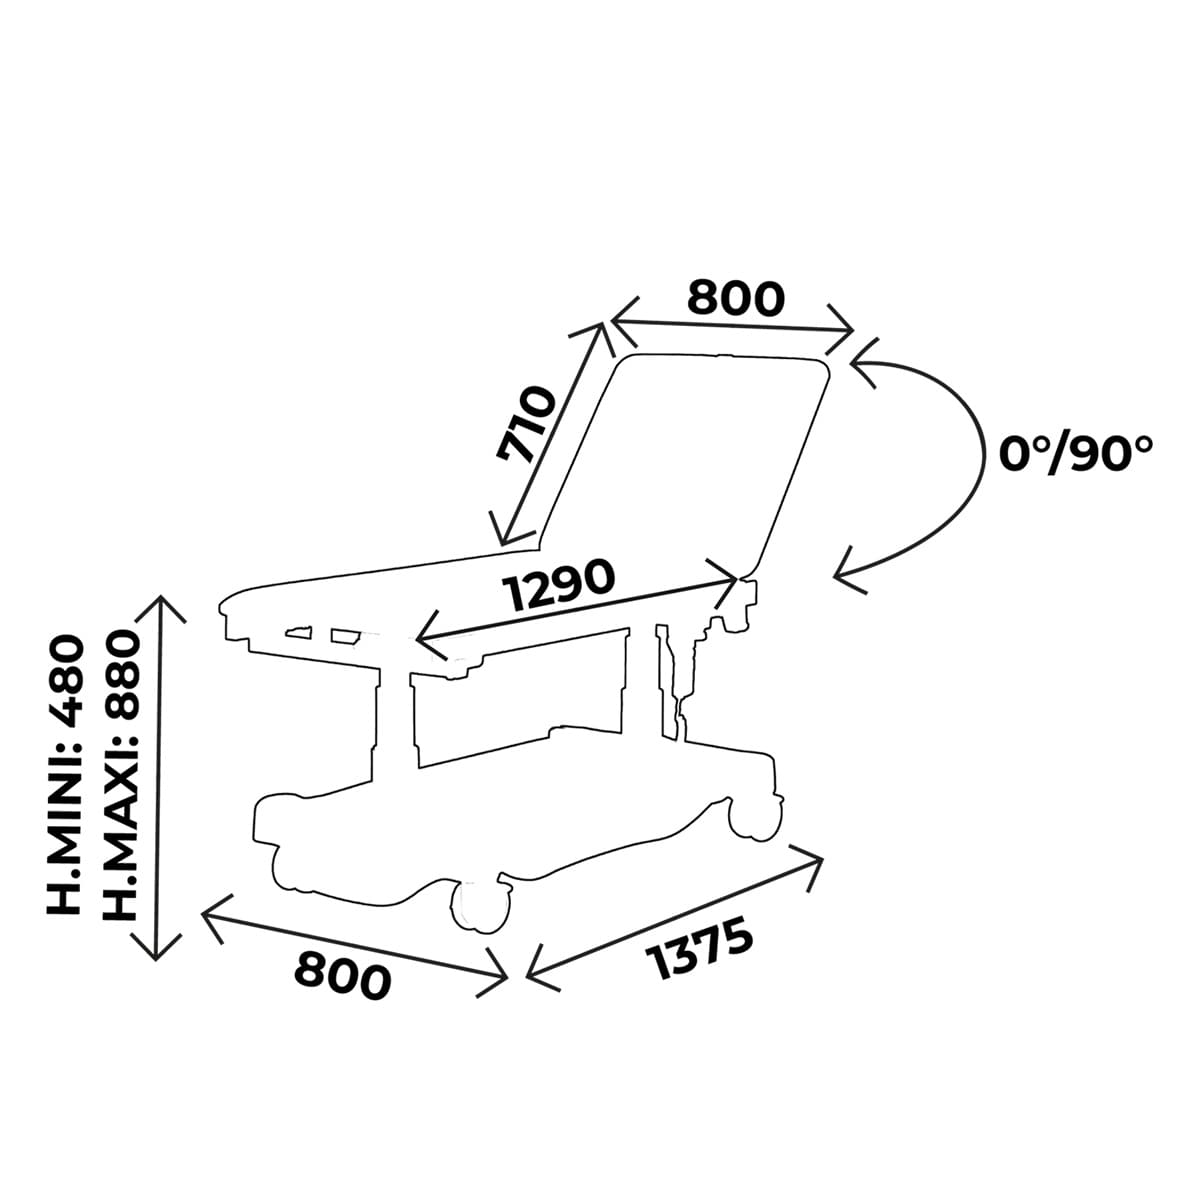 Examination couch width 80cm, hand remote